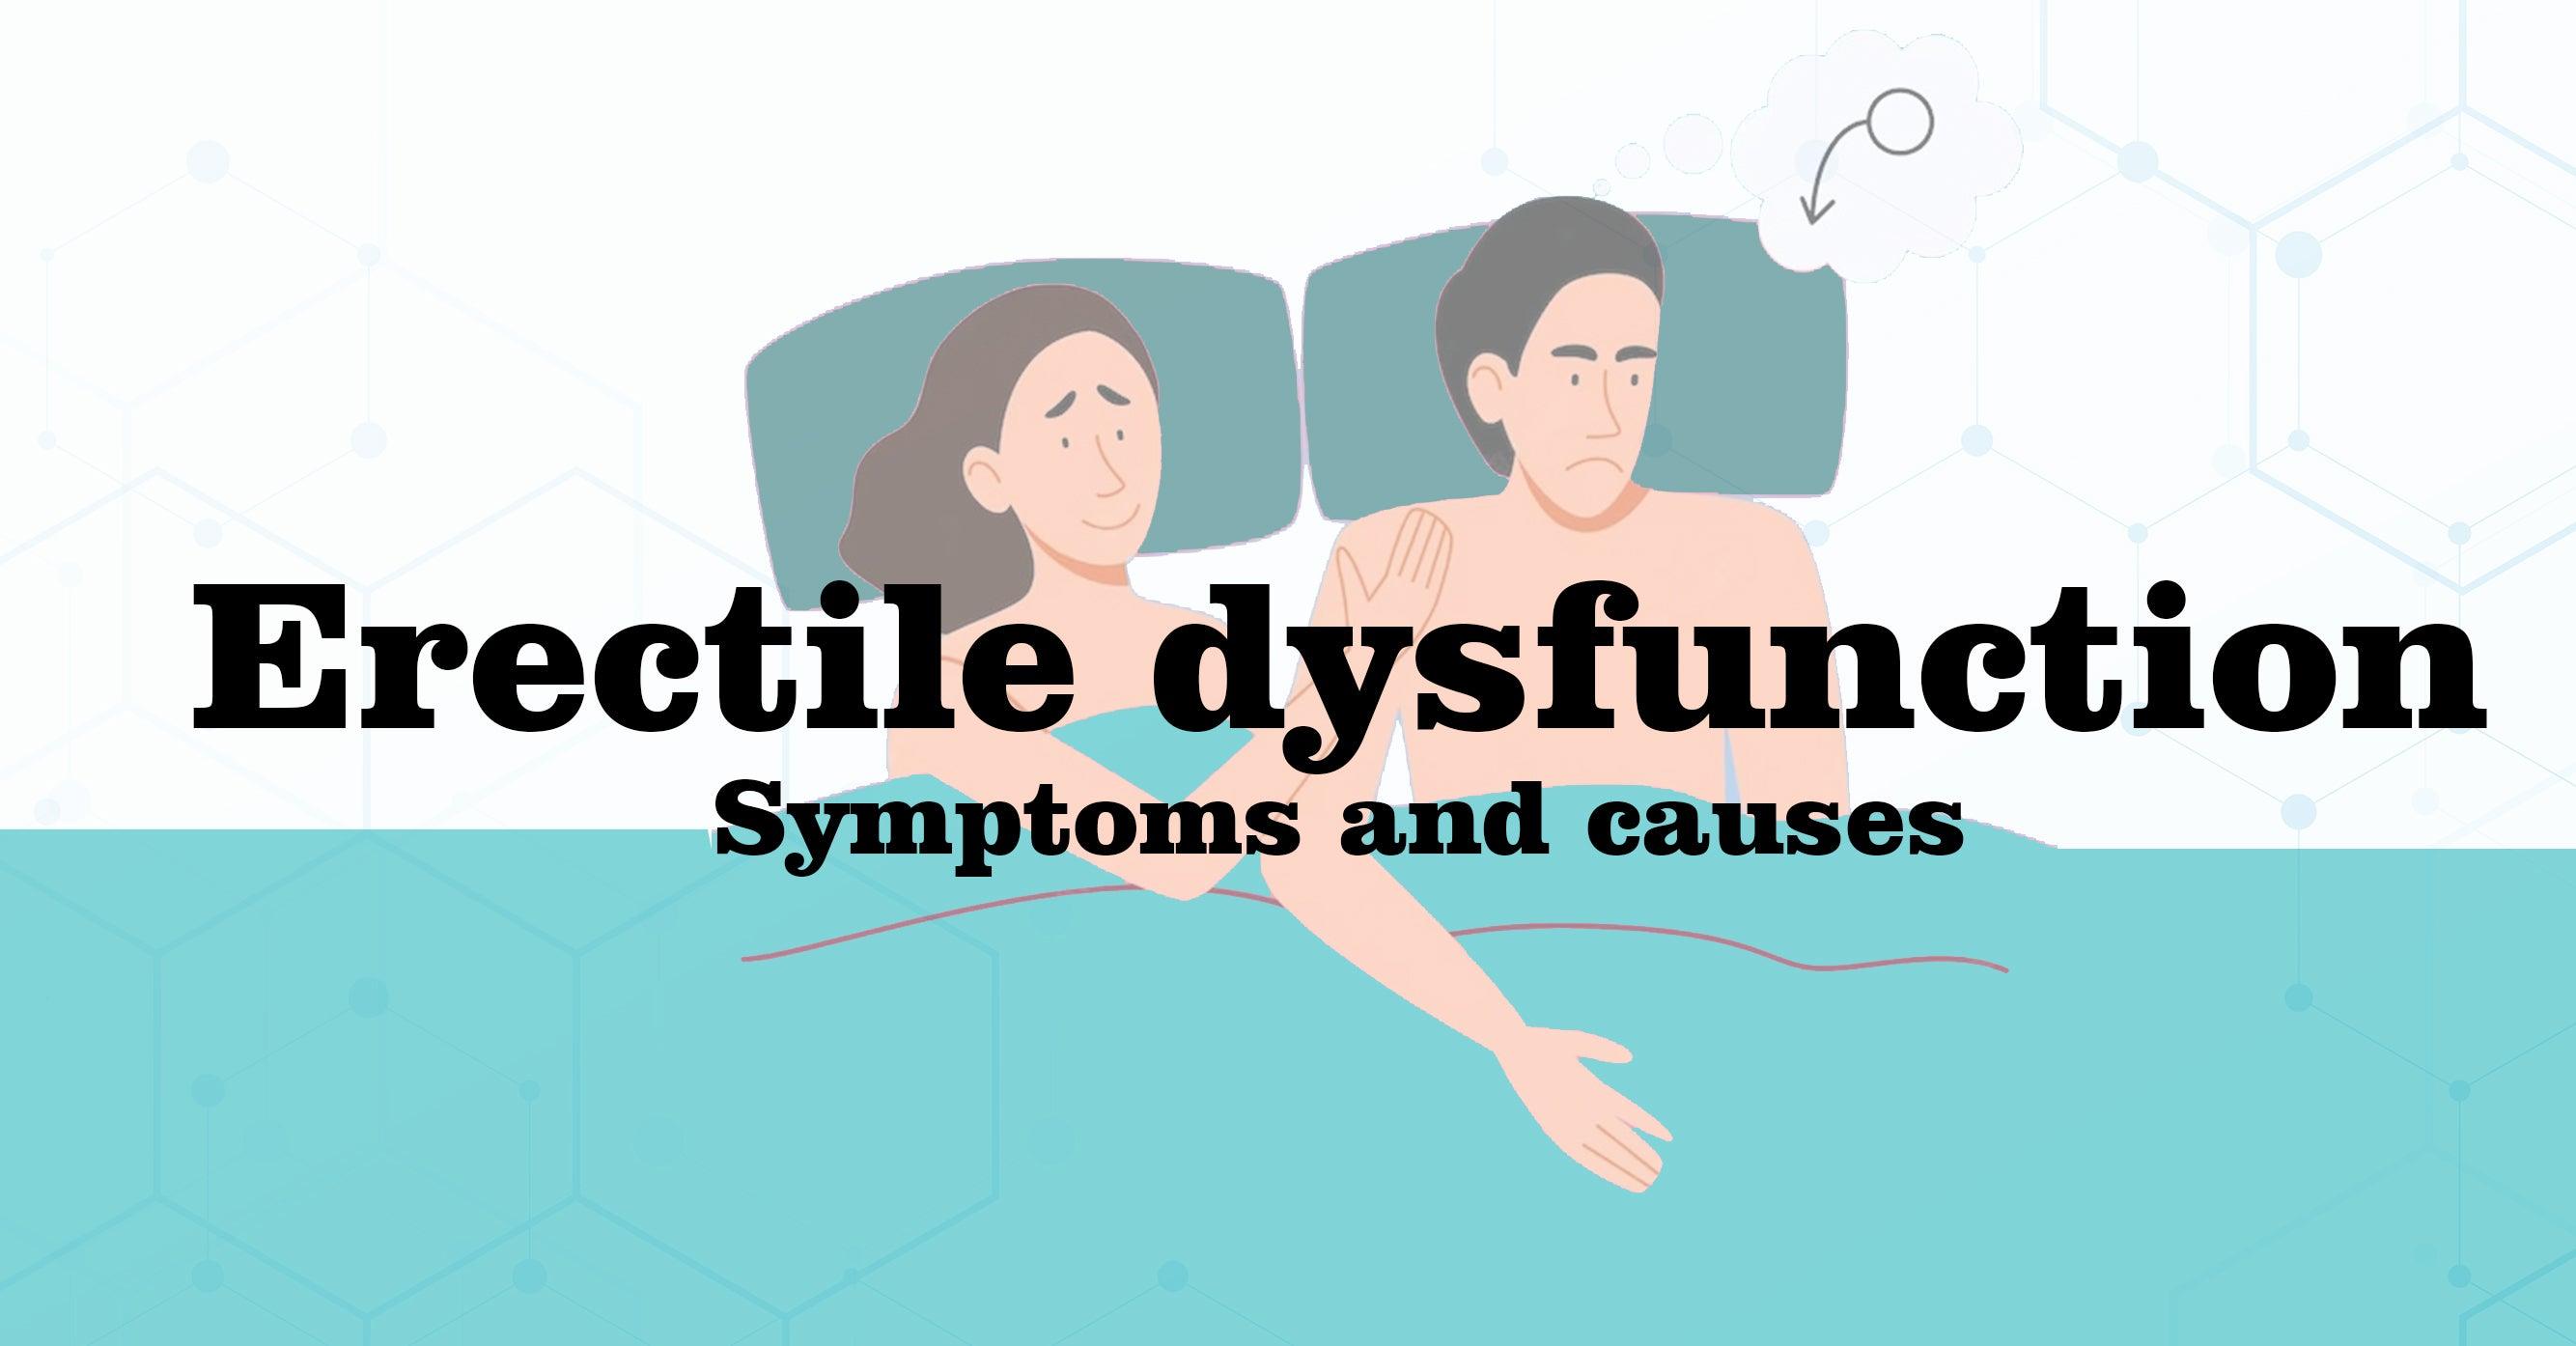 Erectile dysfunction - Symptoms and causes - PositiveGems